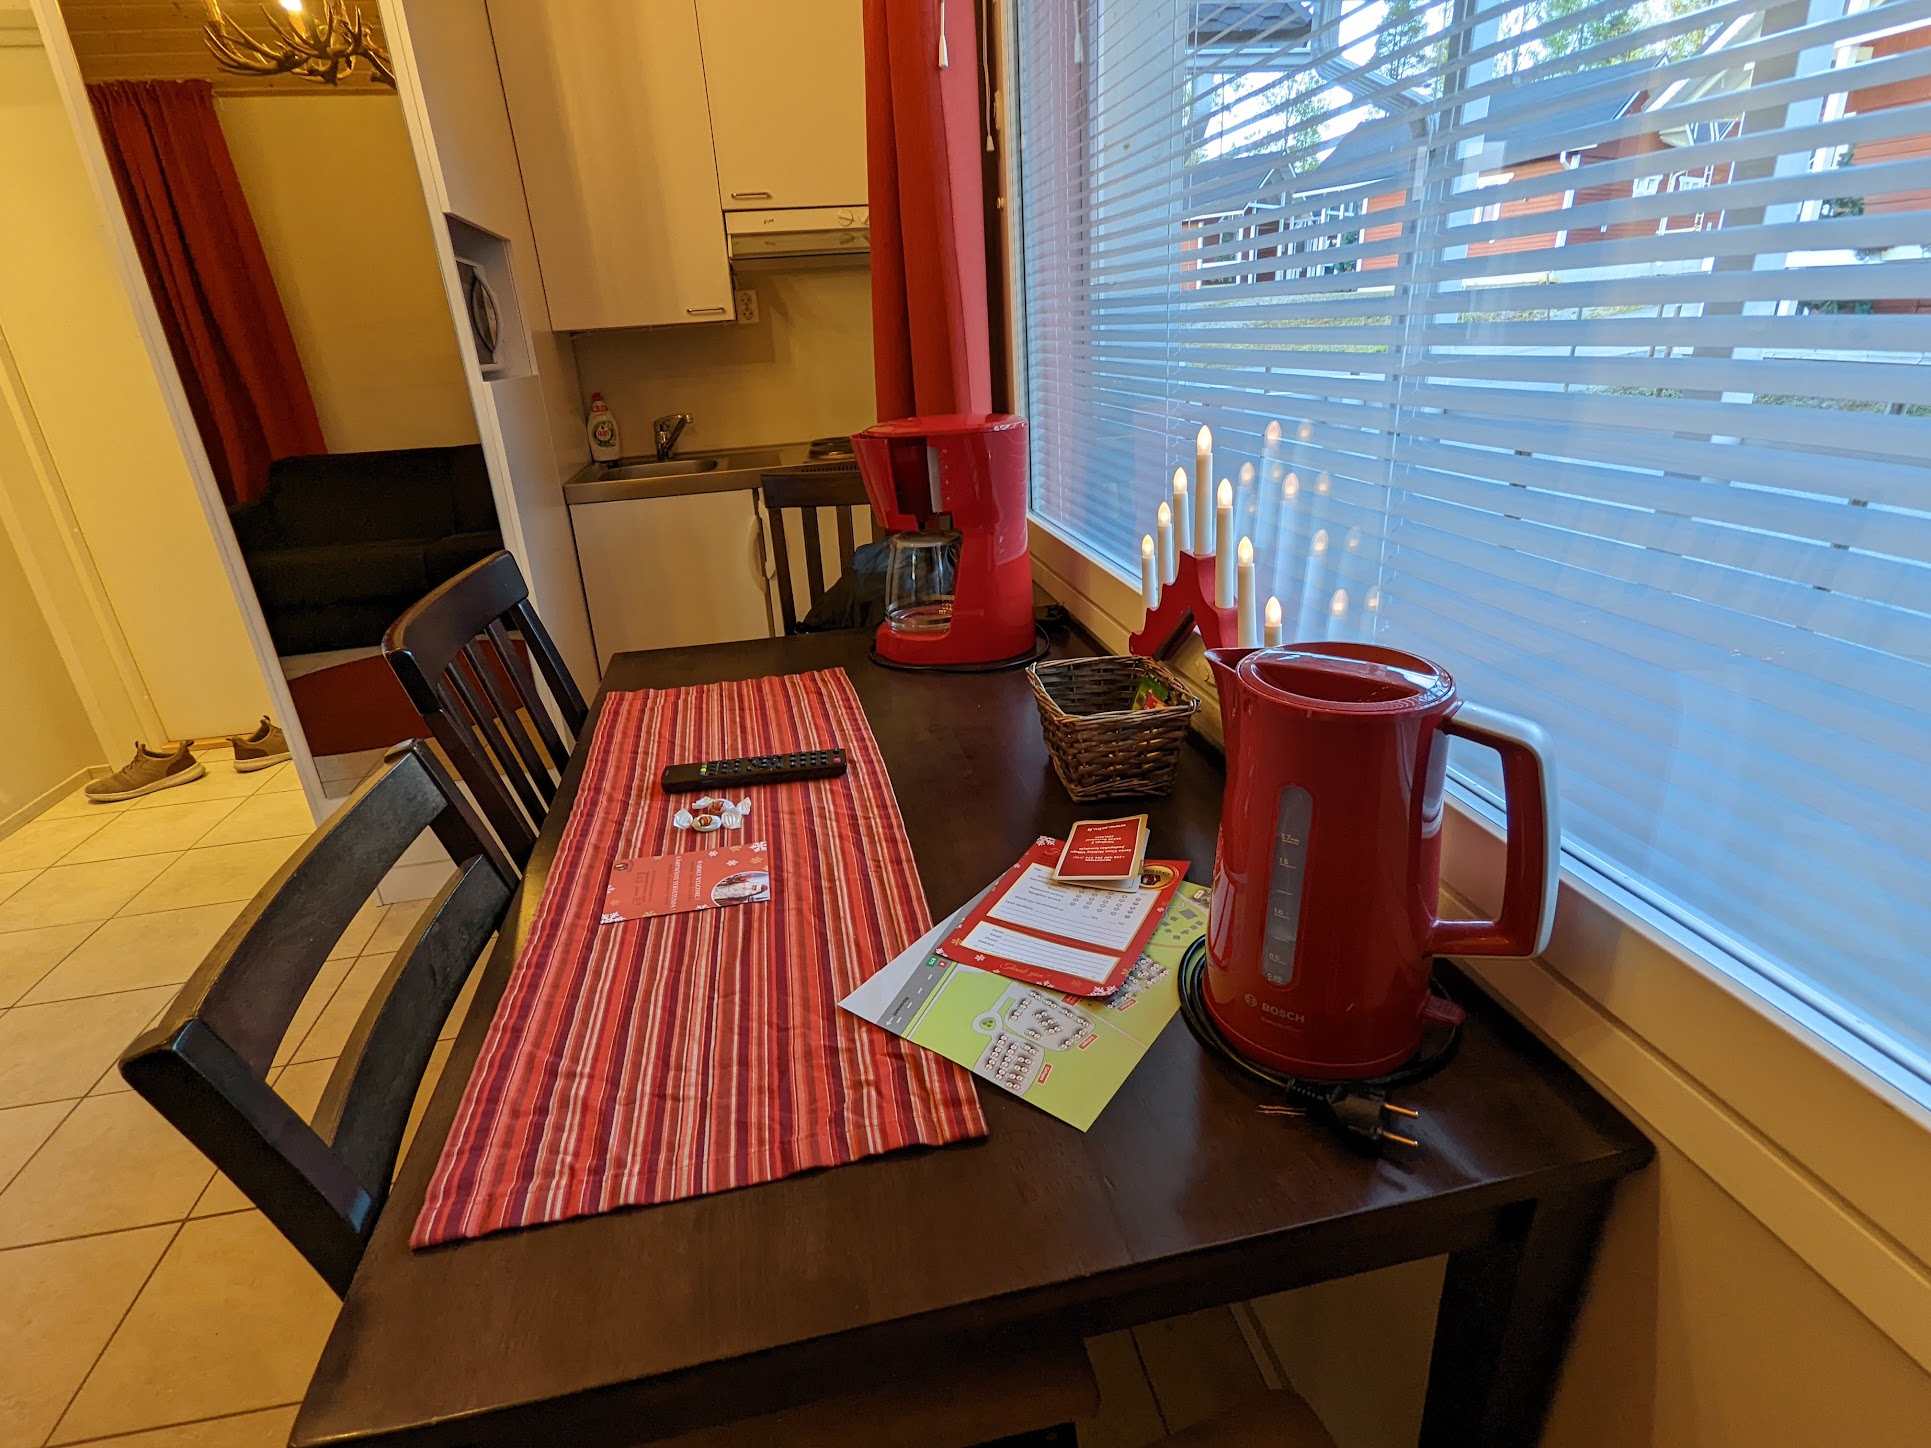 a table with a red and white tablecloth and a red pitcher on it